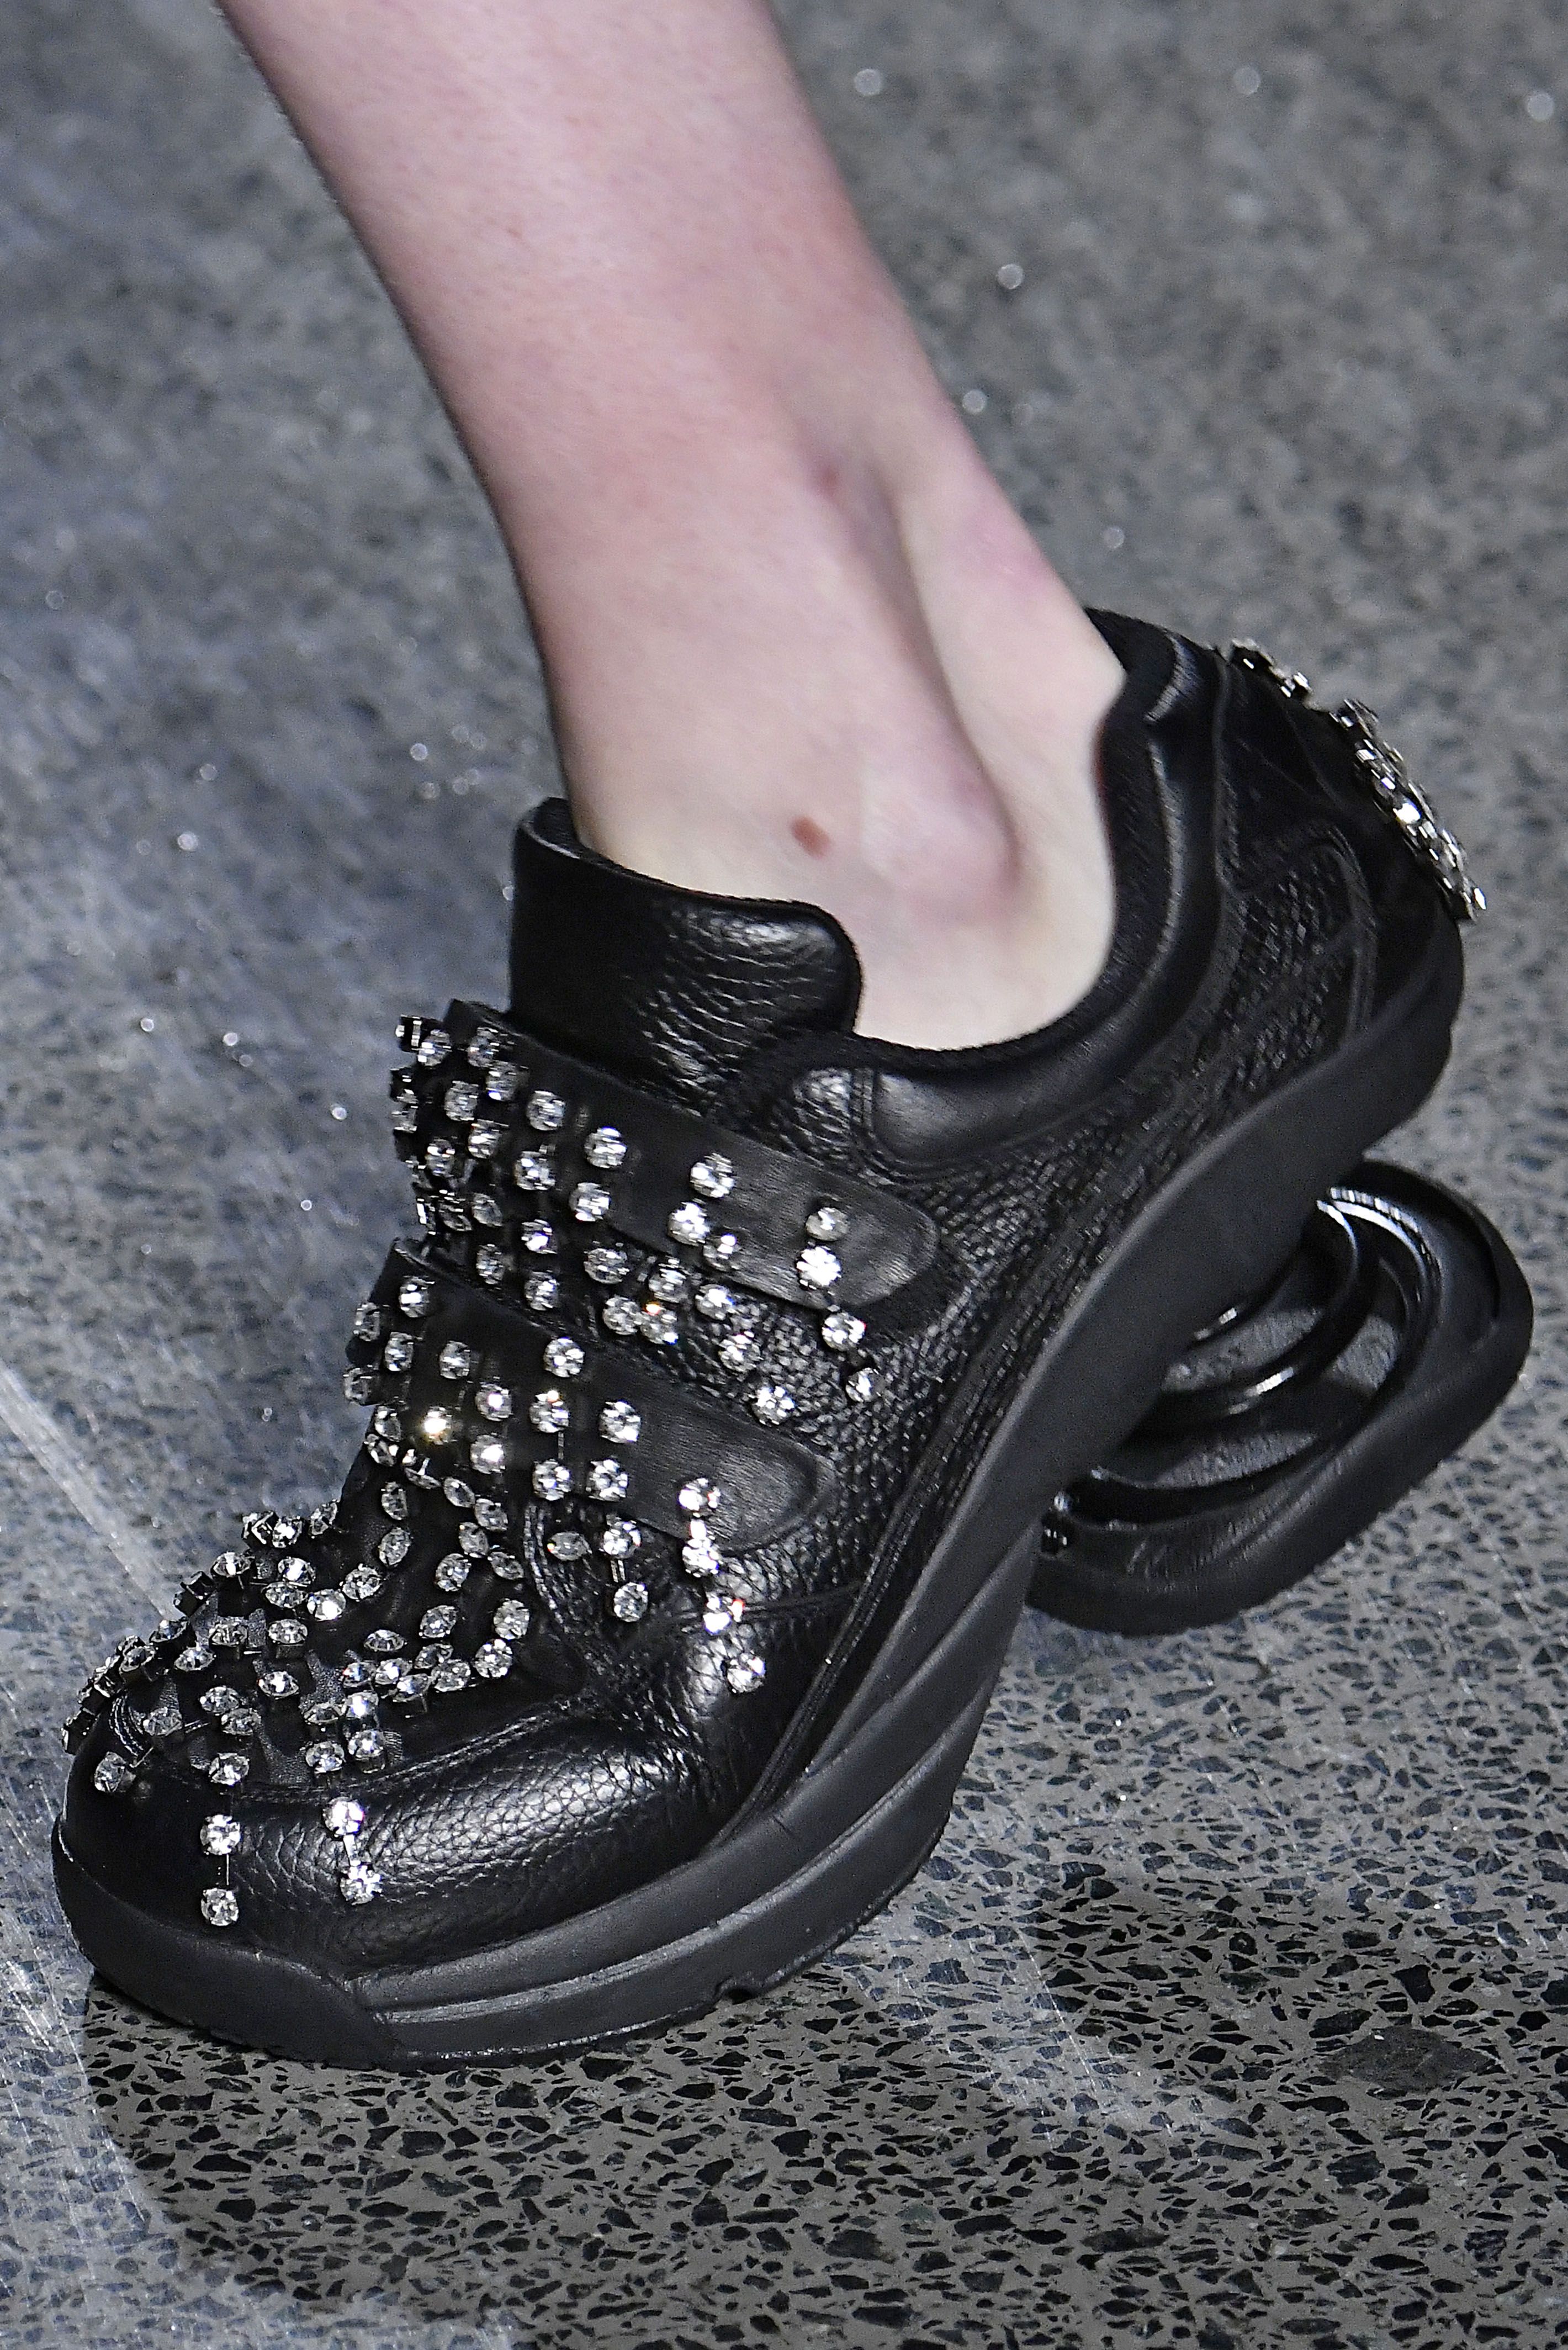 Christopher Kane Just Took The Ugly Shoe Trend To A New Level